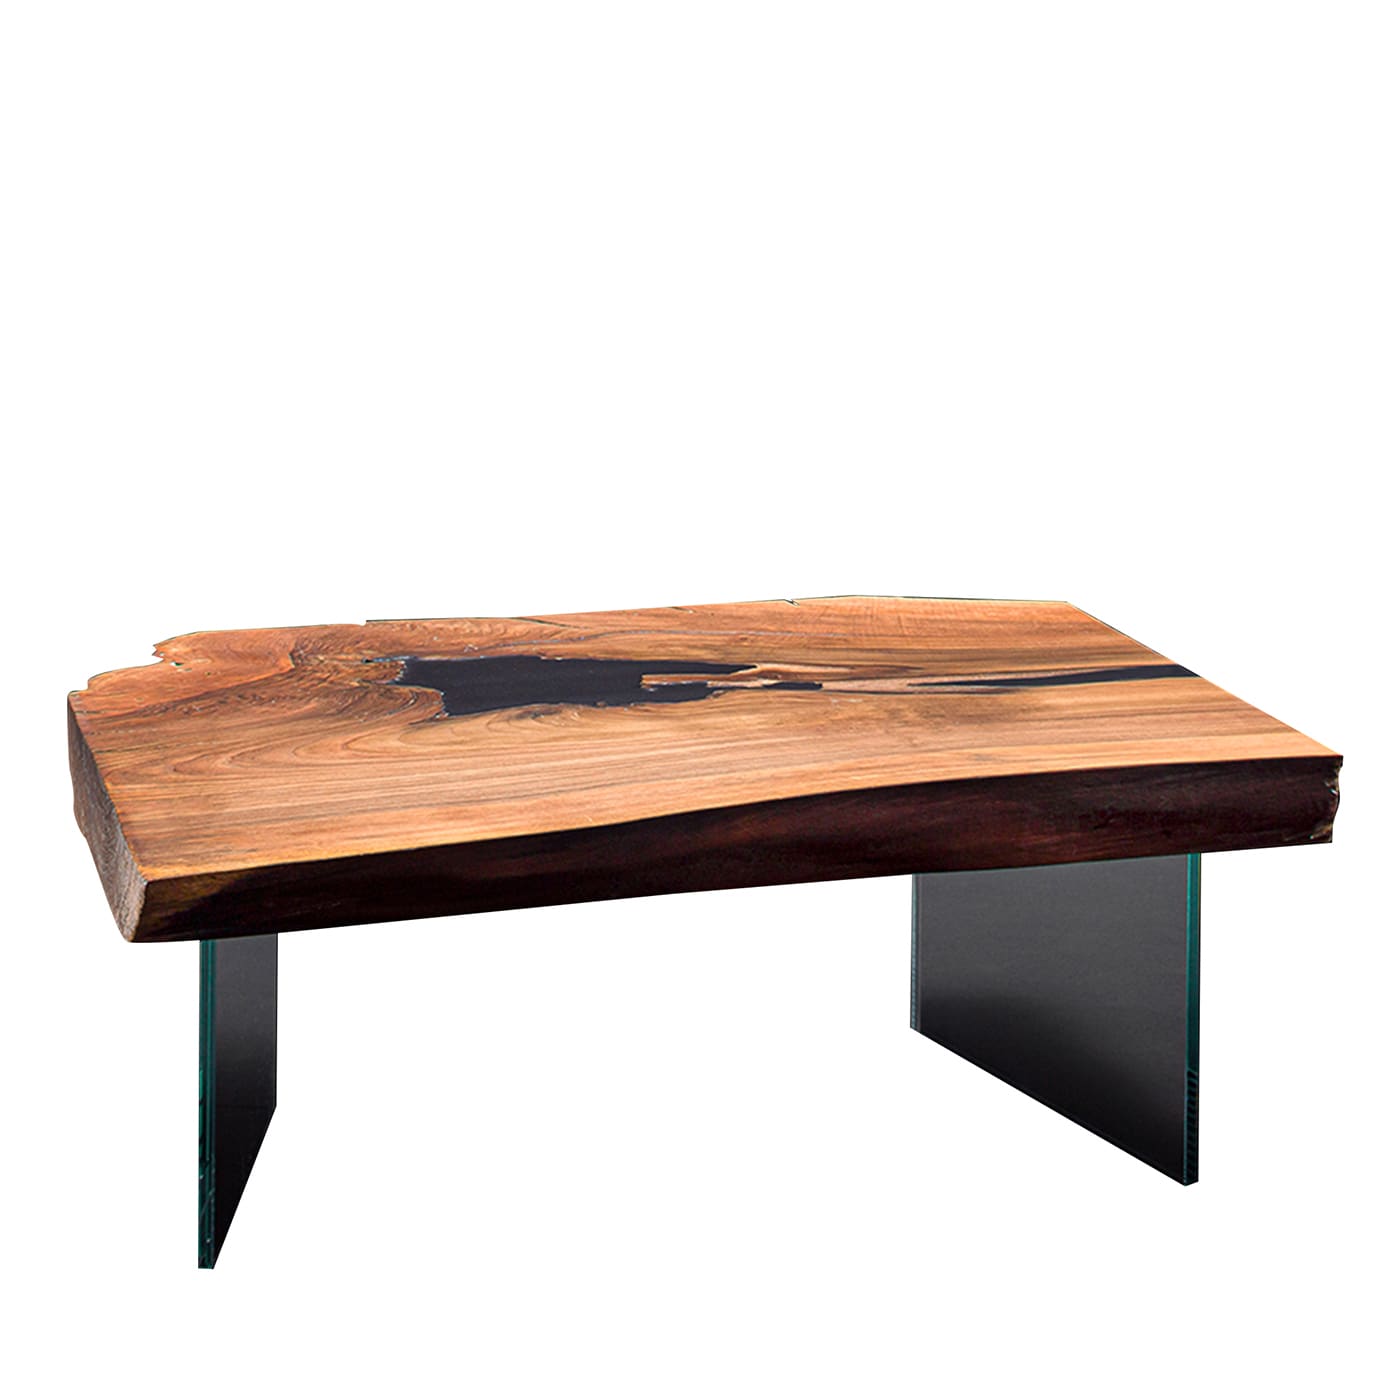 Walnut and resin side table - Bruno Spreafico